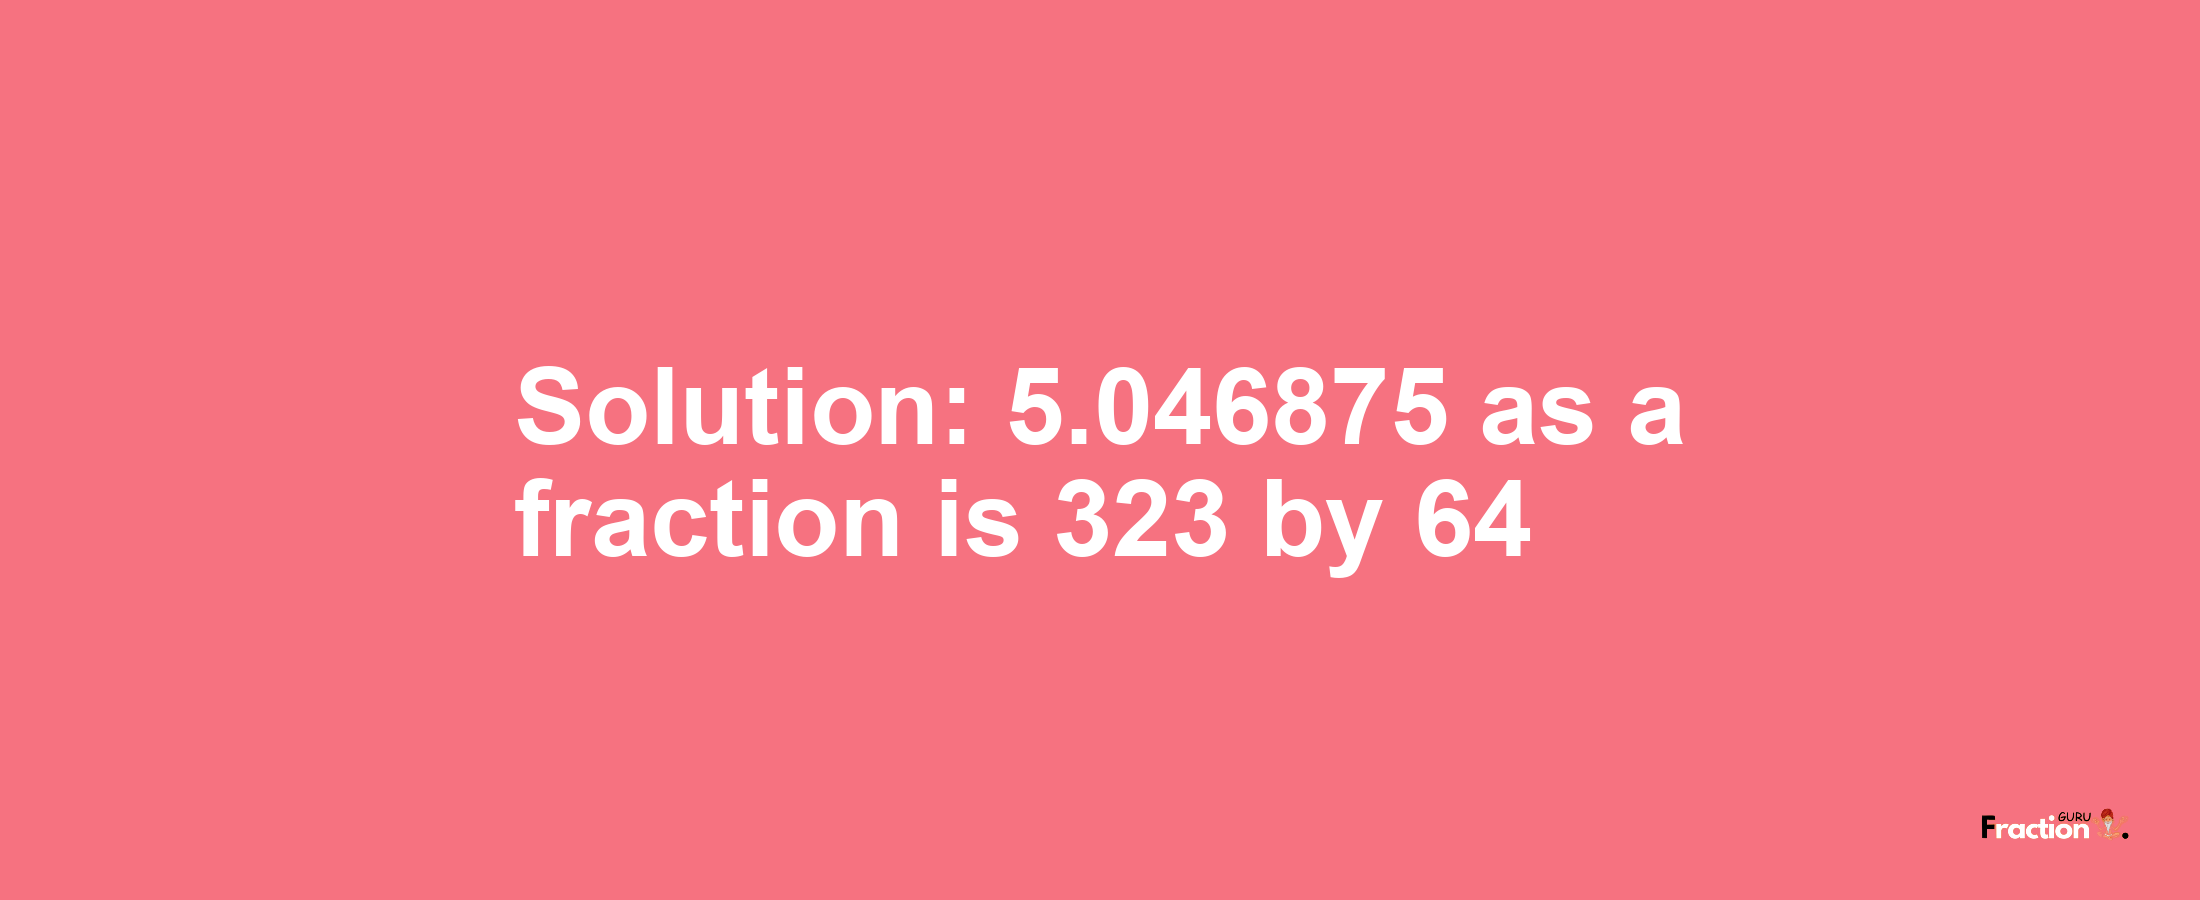 Solution:5.046875 as a fraction is 323/64